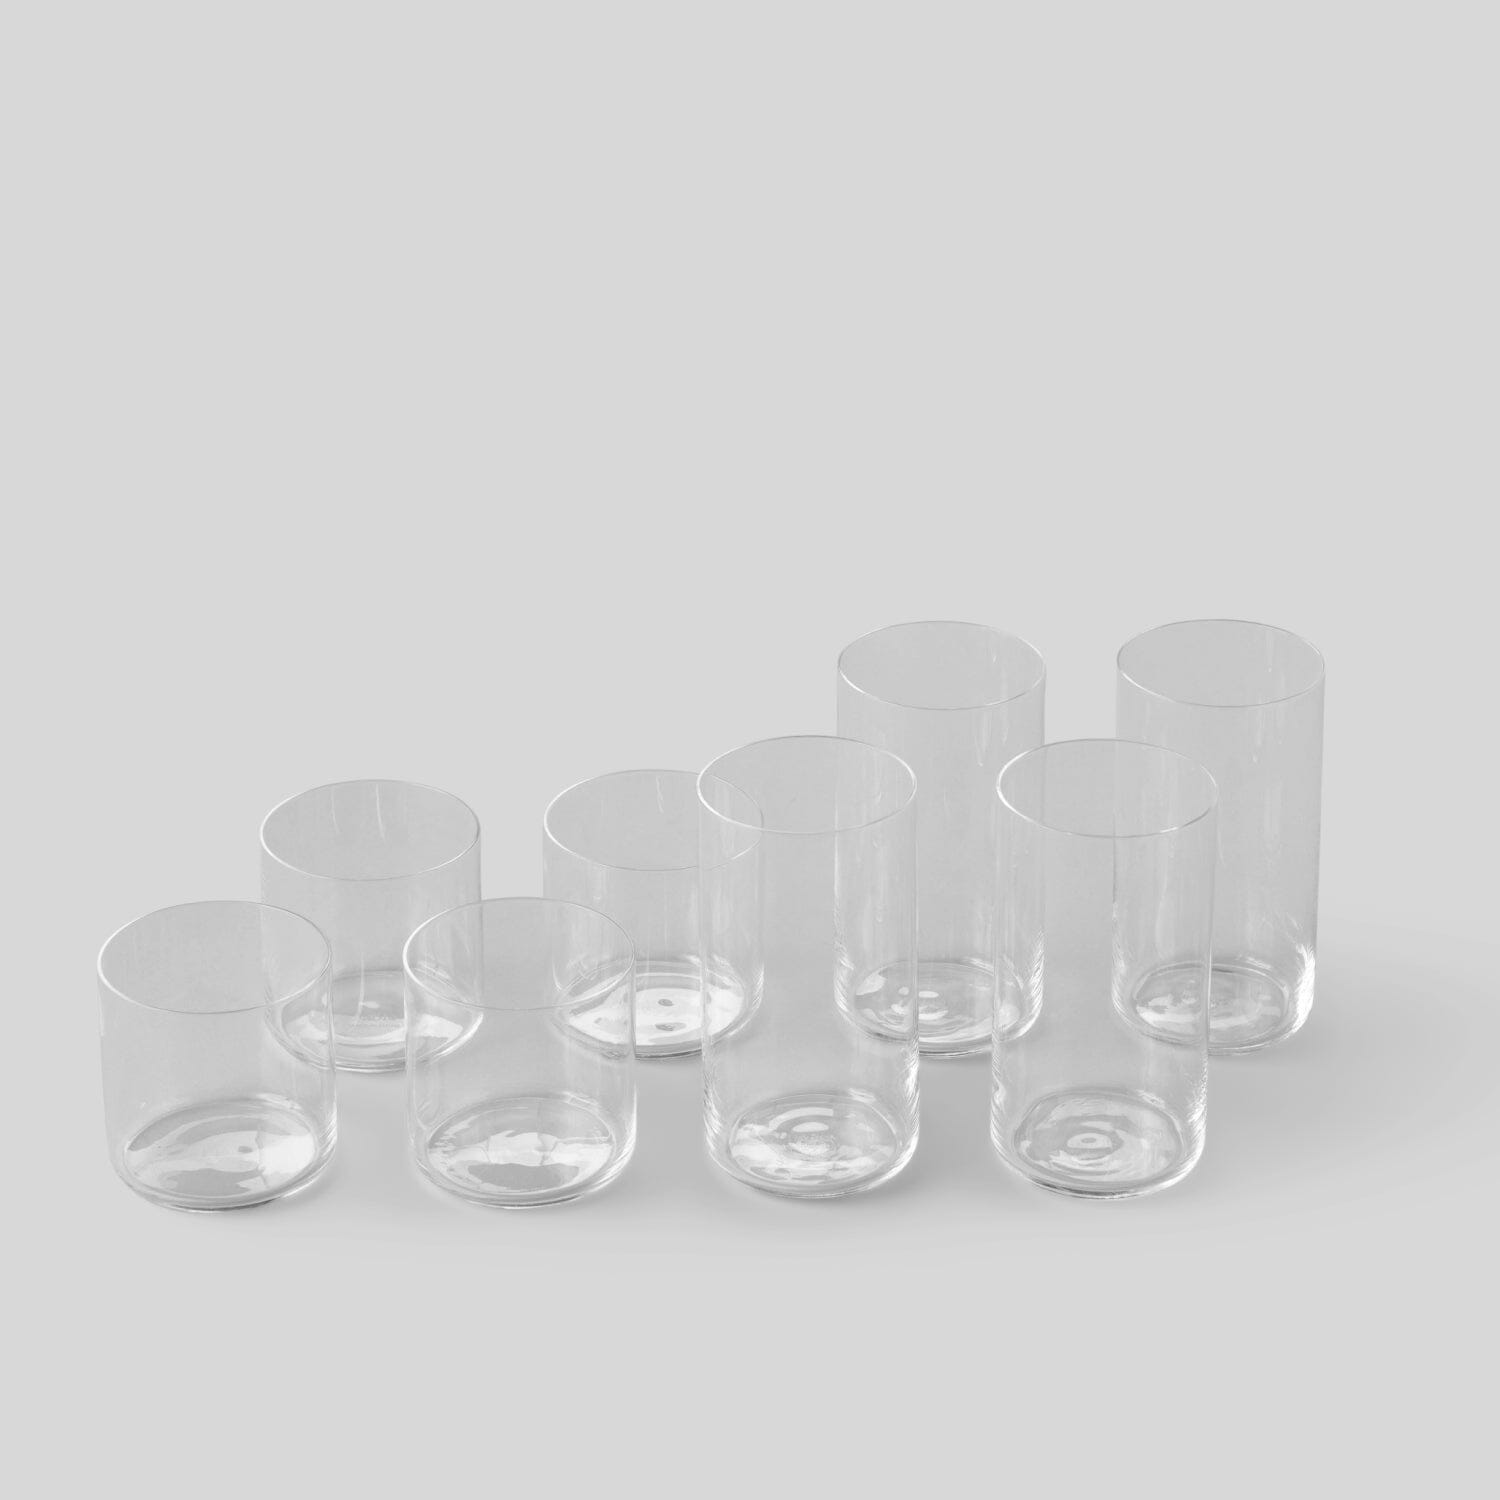 Glassware Set 4 tall glasses and 4 short glasses #clear